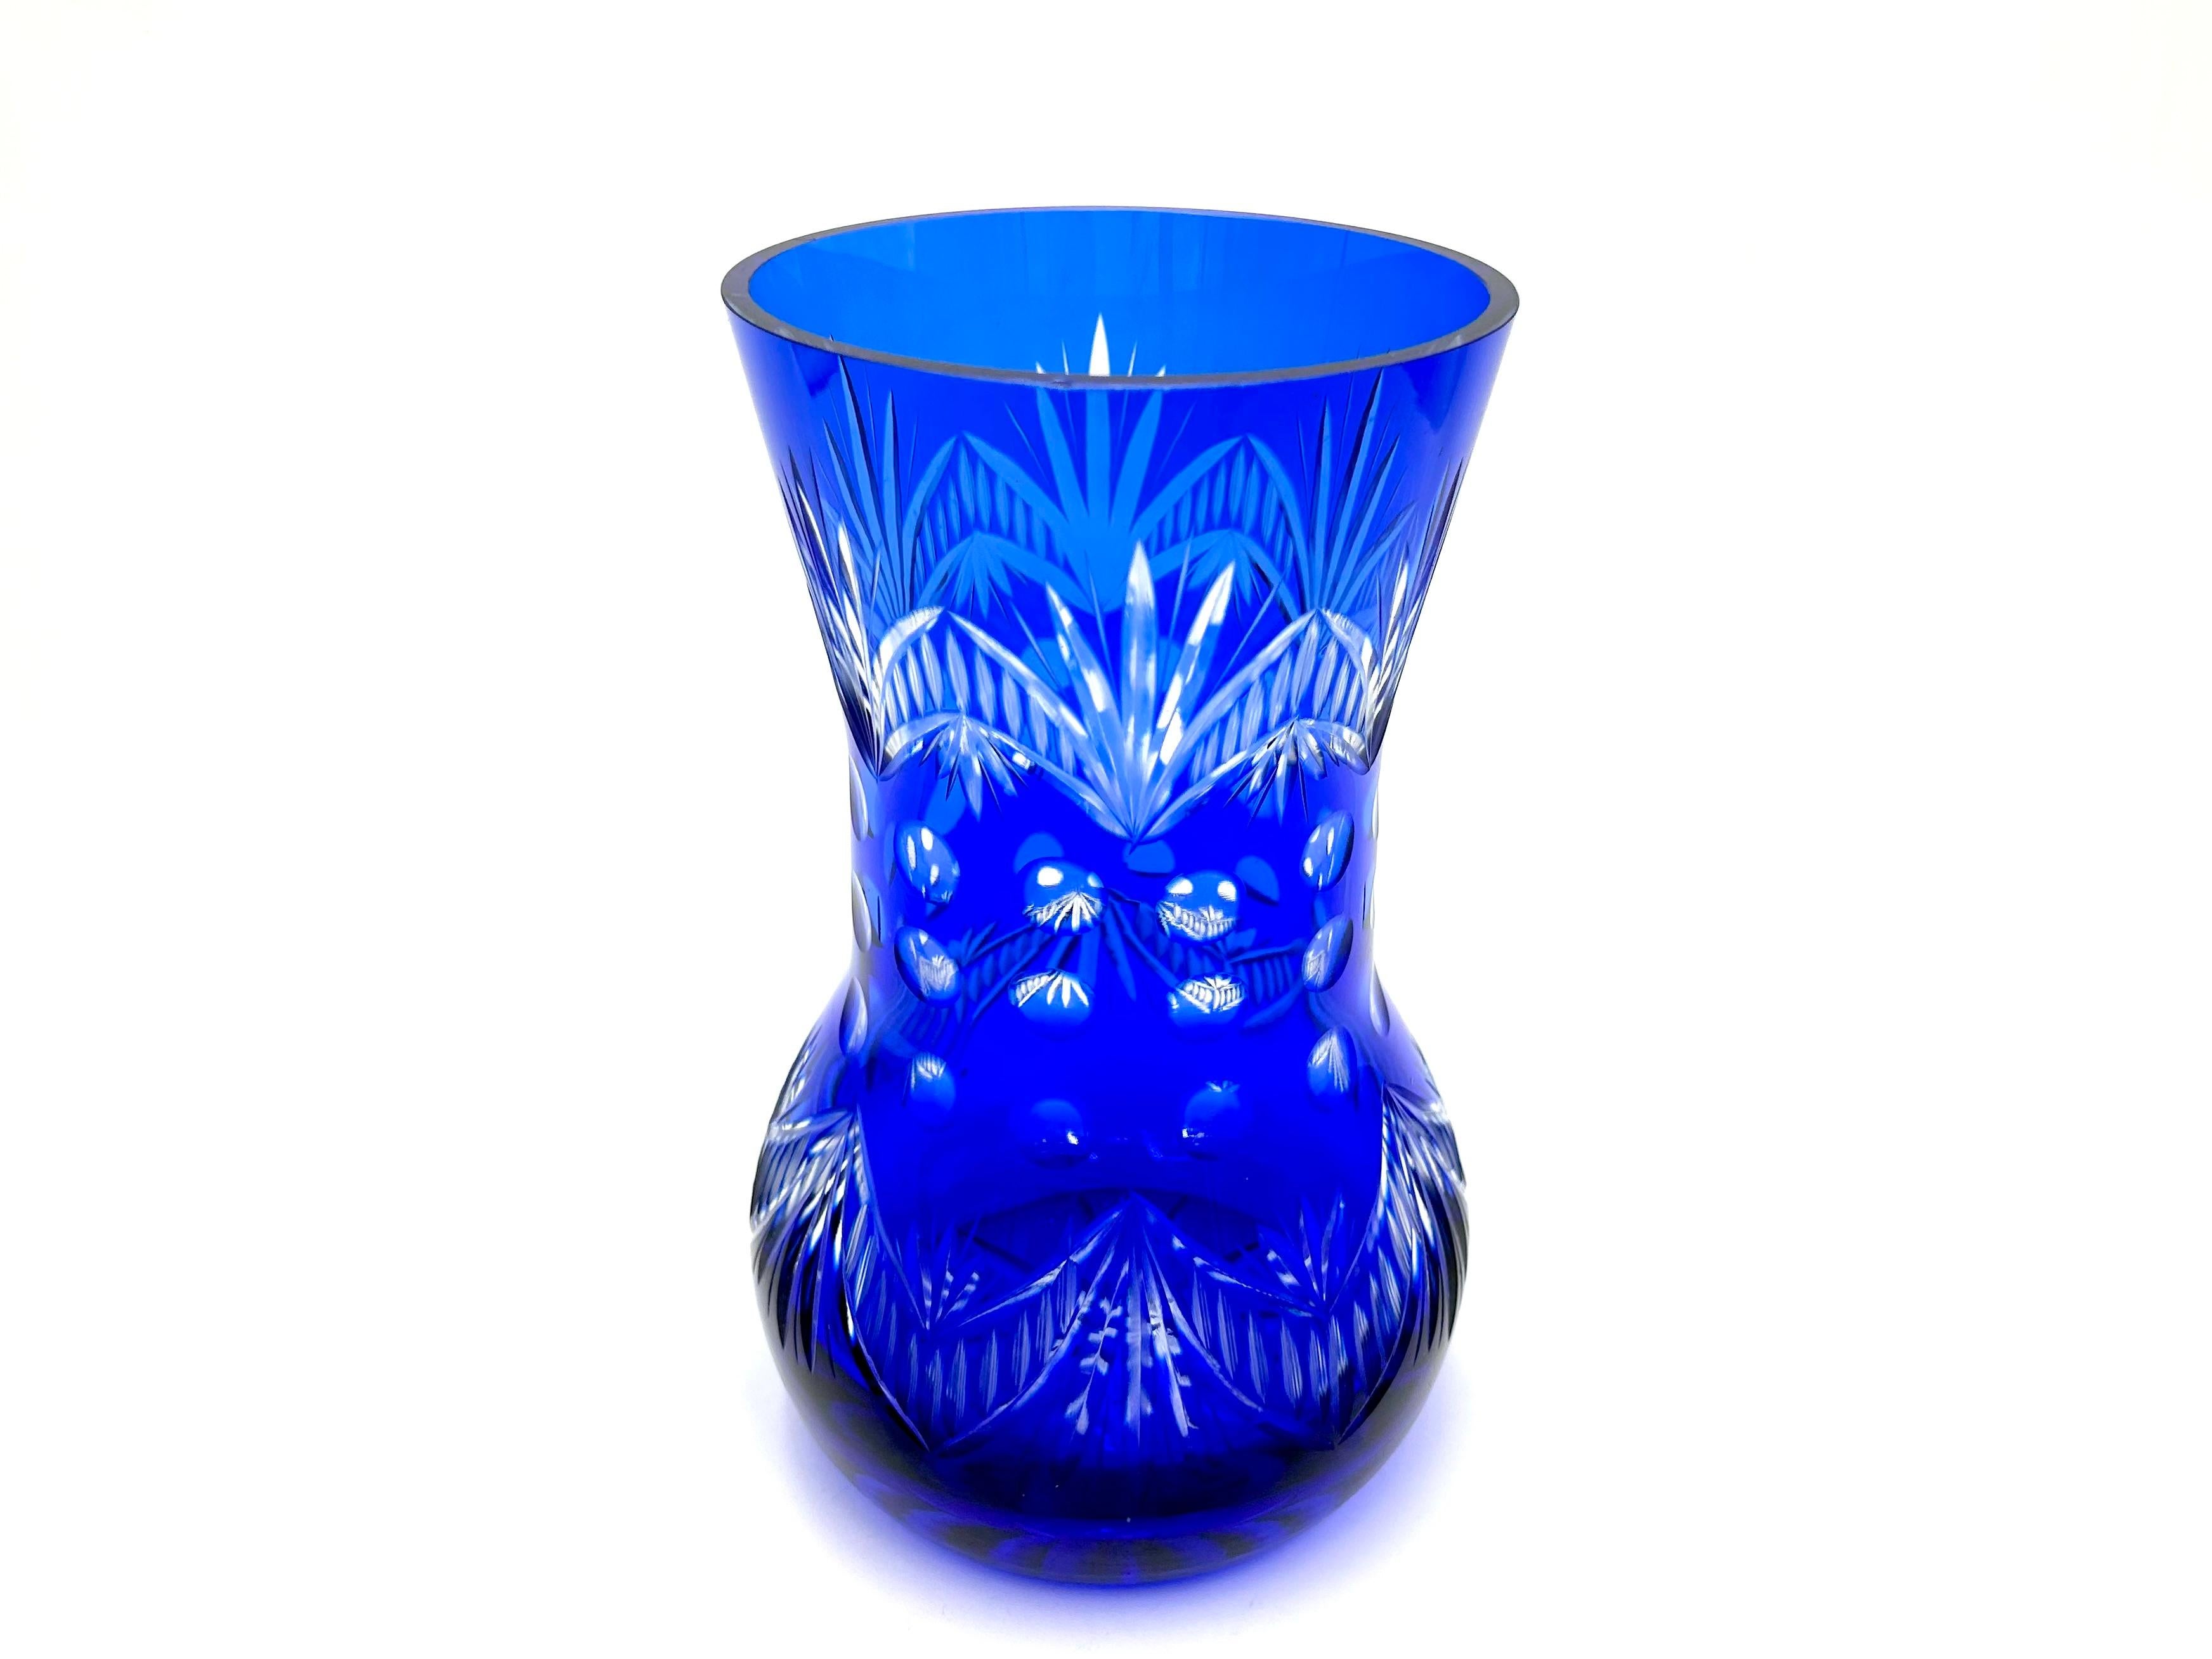 Cobalt crystal vase

Made in Poland in the 1960s.

Very good condition, no damage

height 22 cm, diameter 12 cm